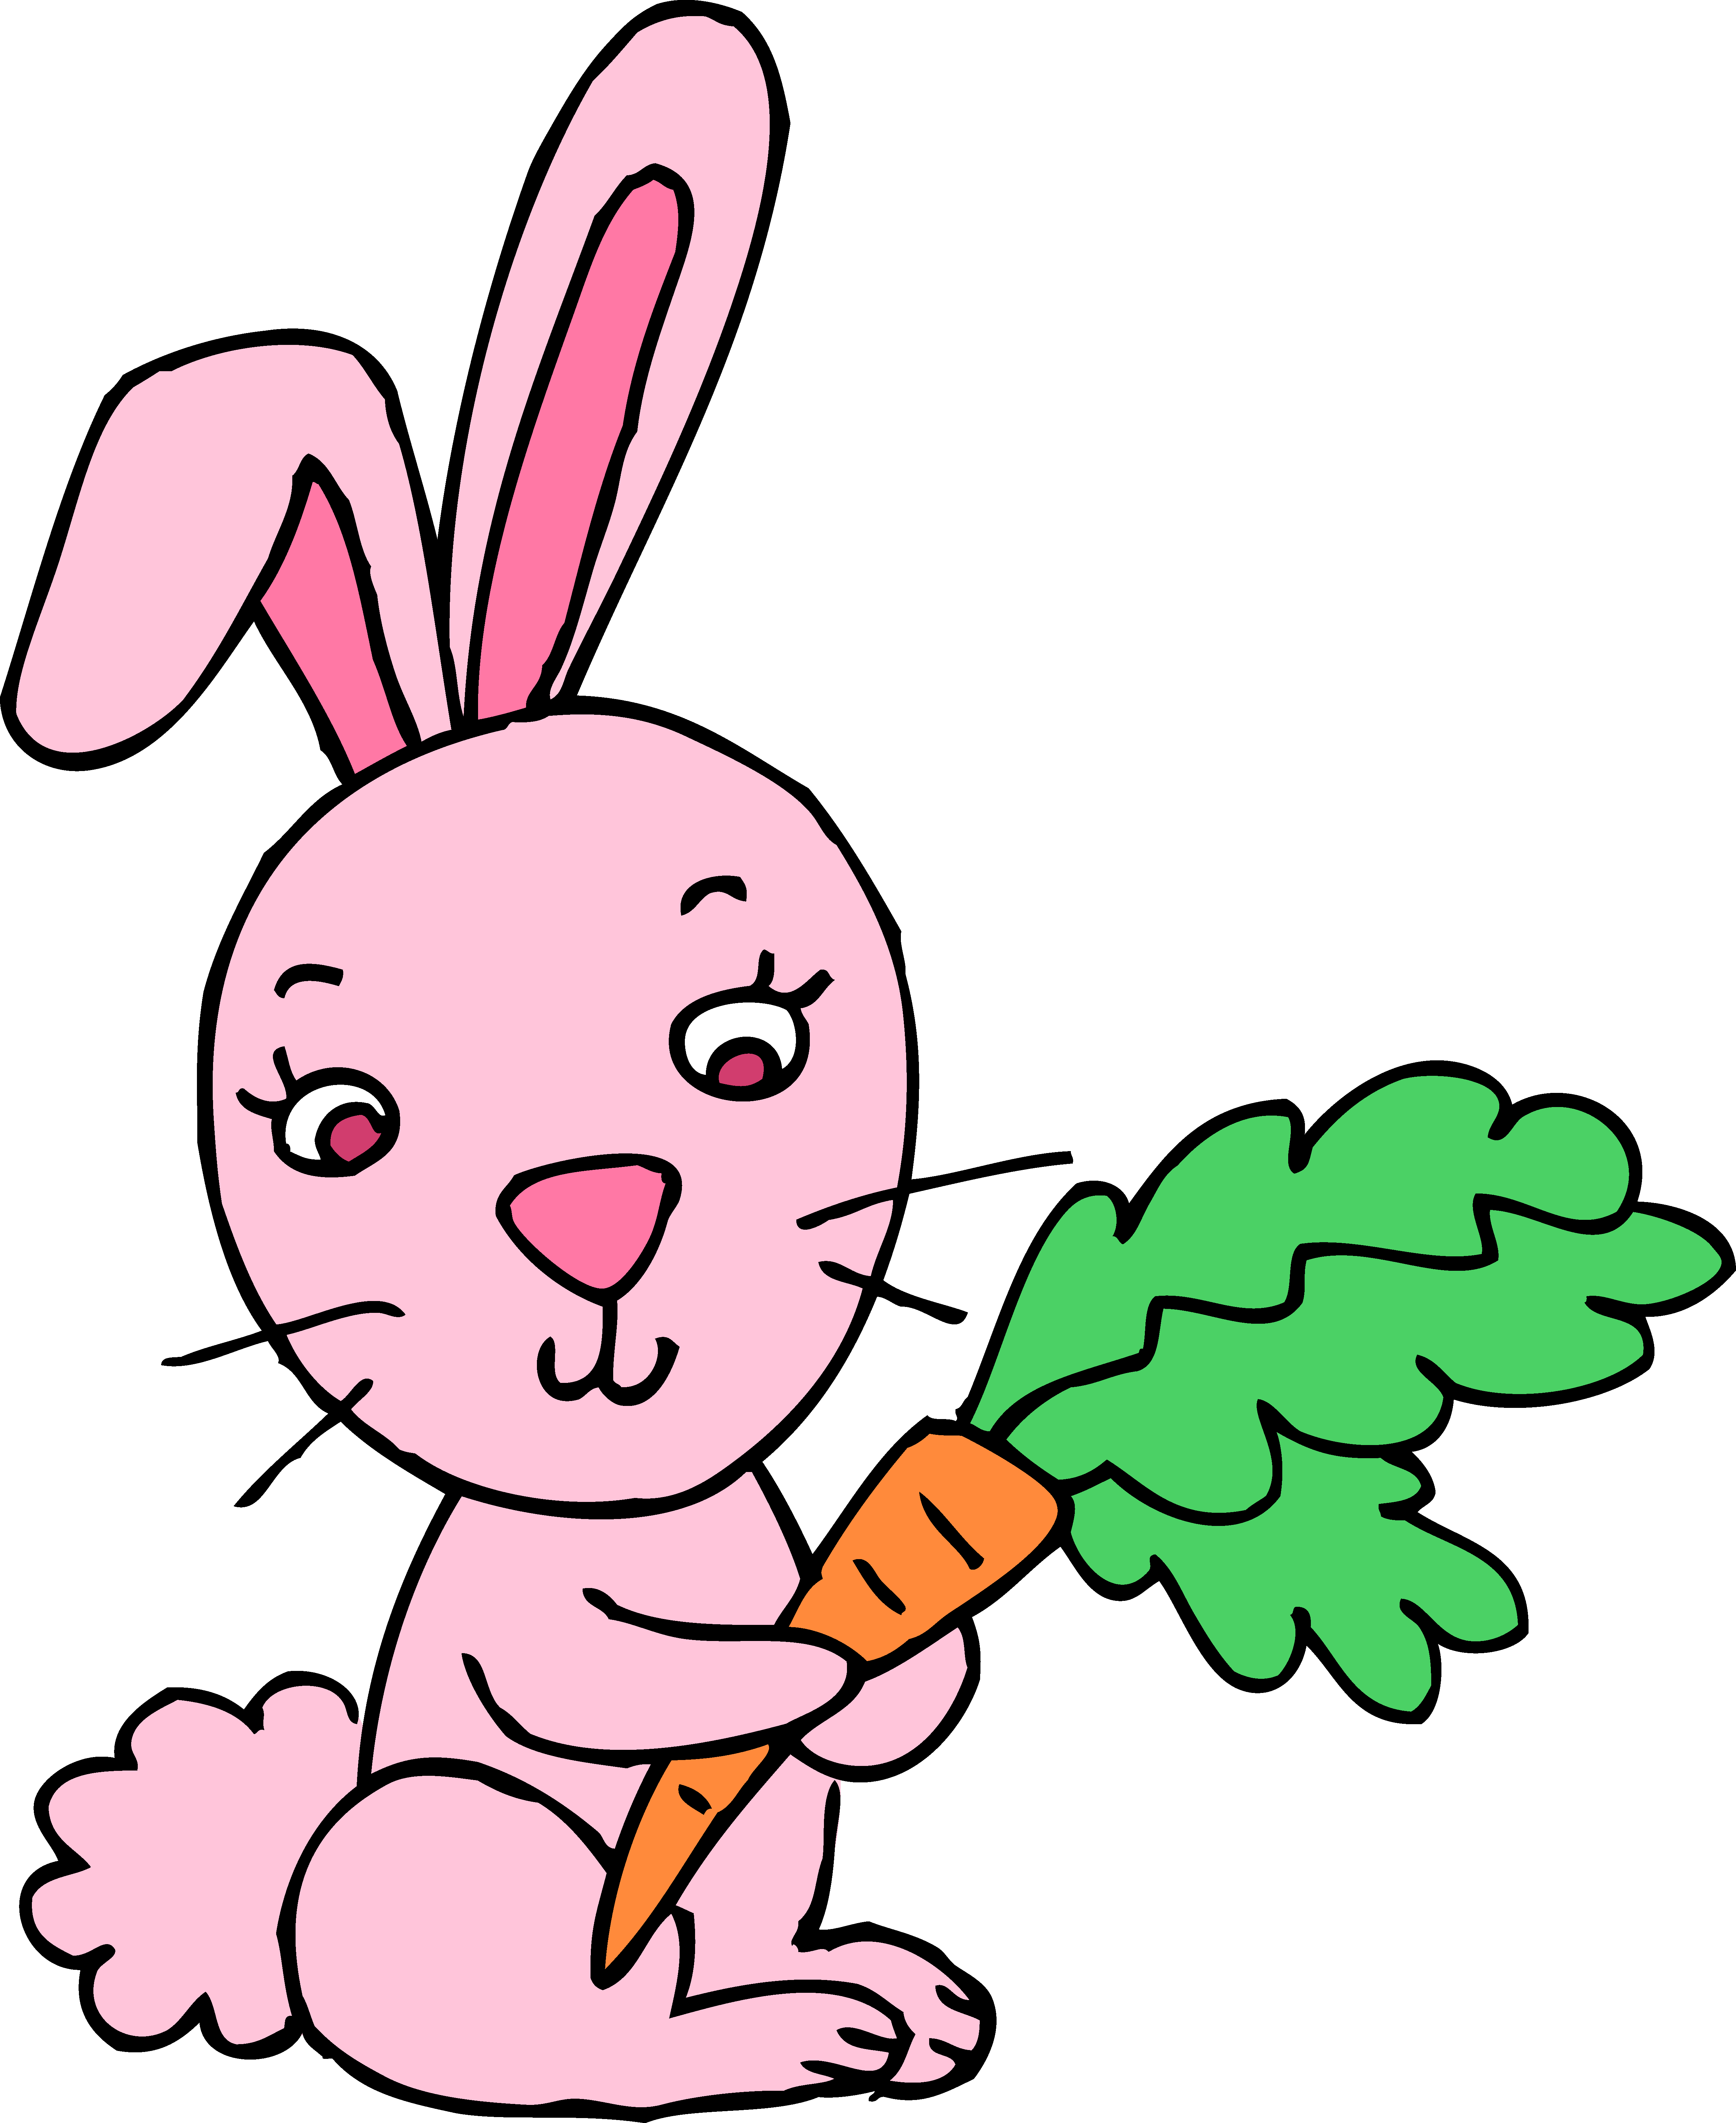 Rabbit clipart #20, Download drawings